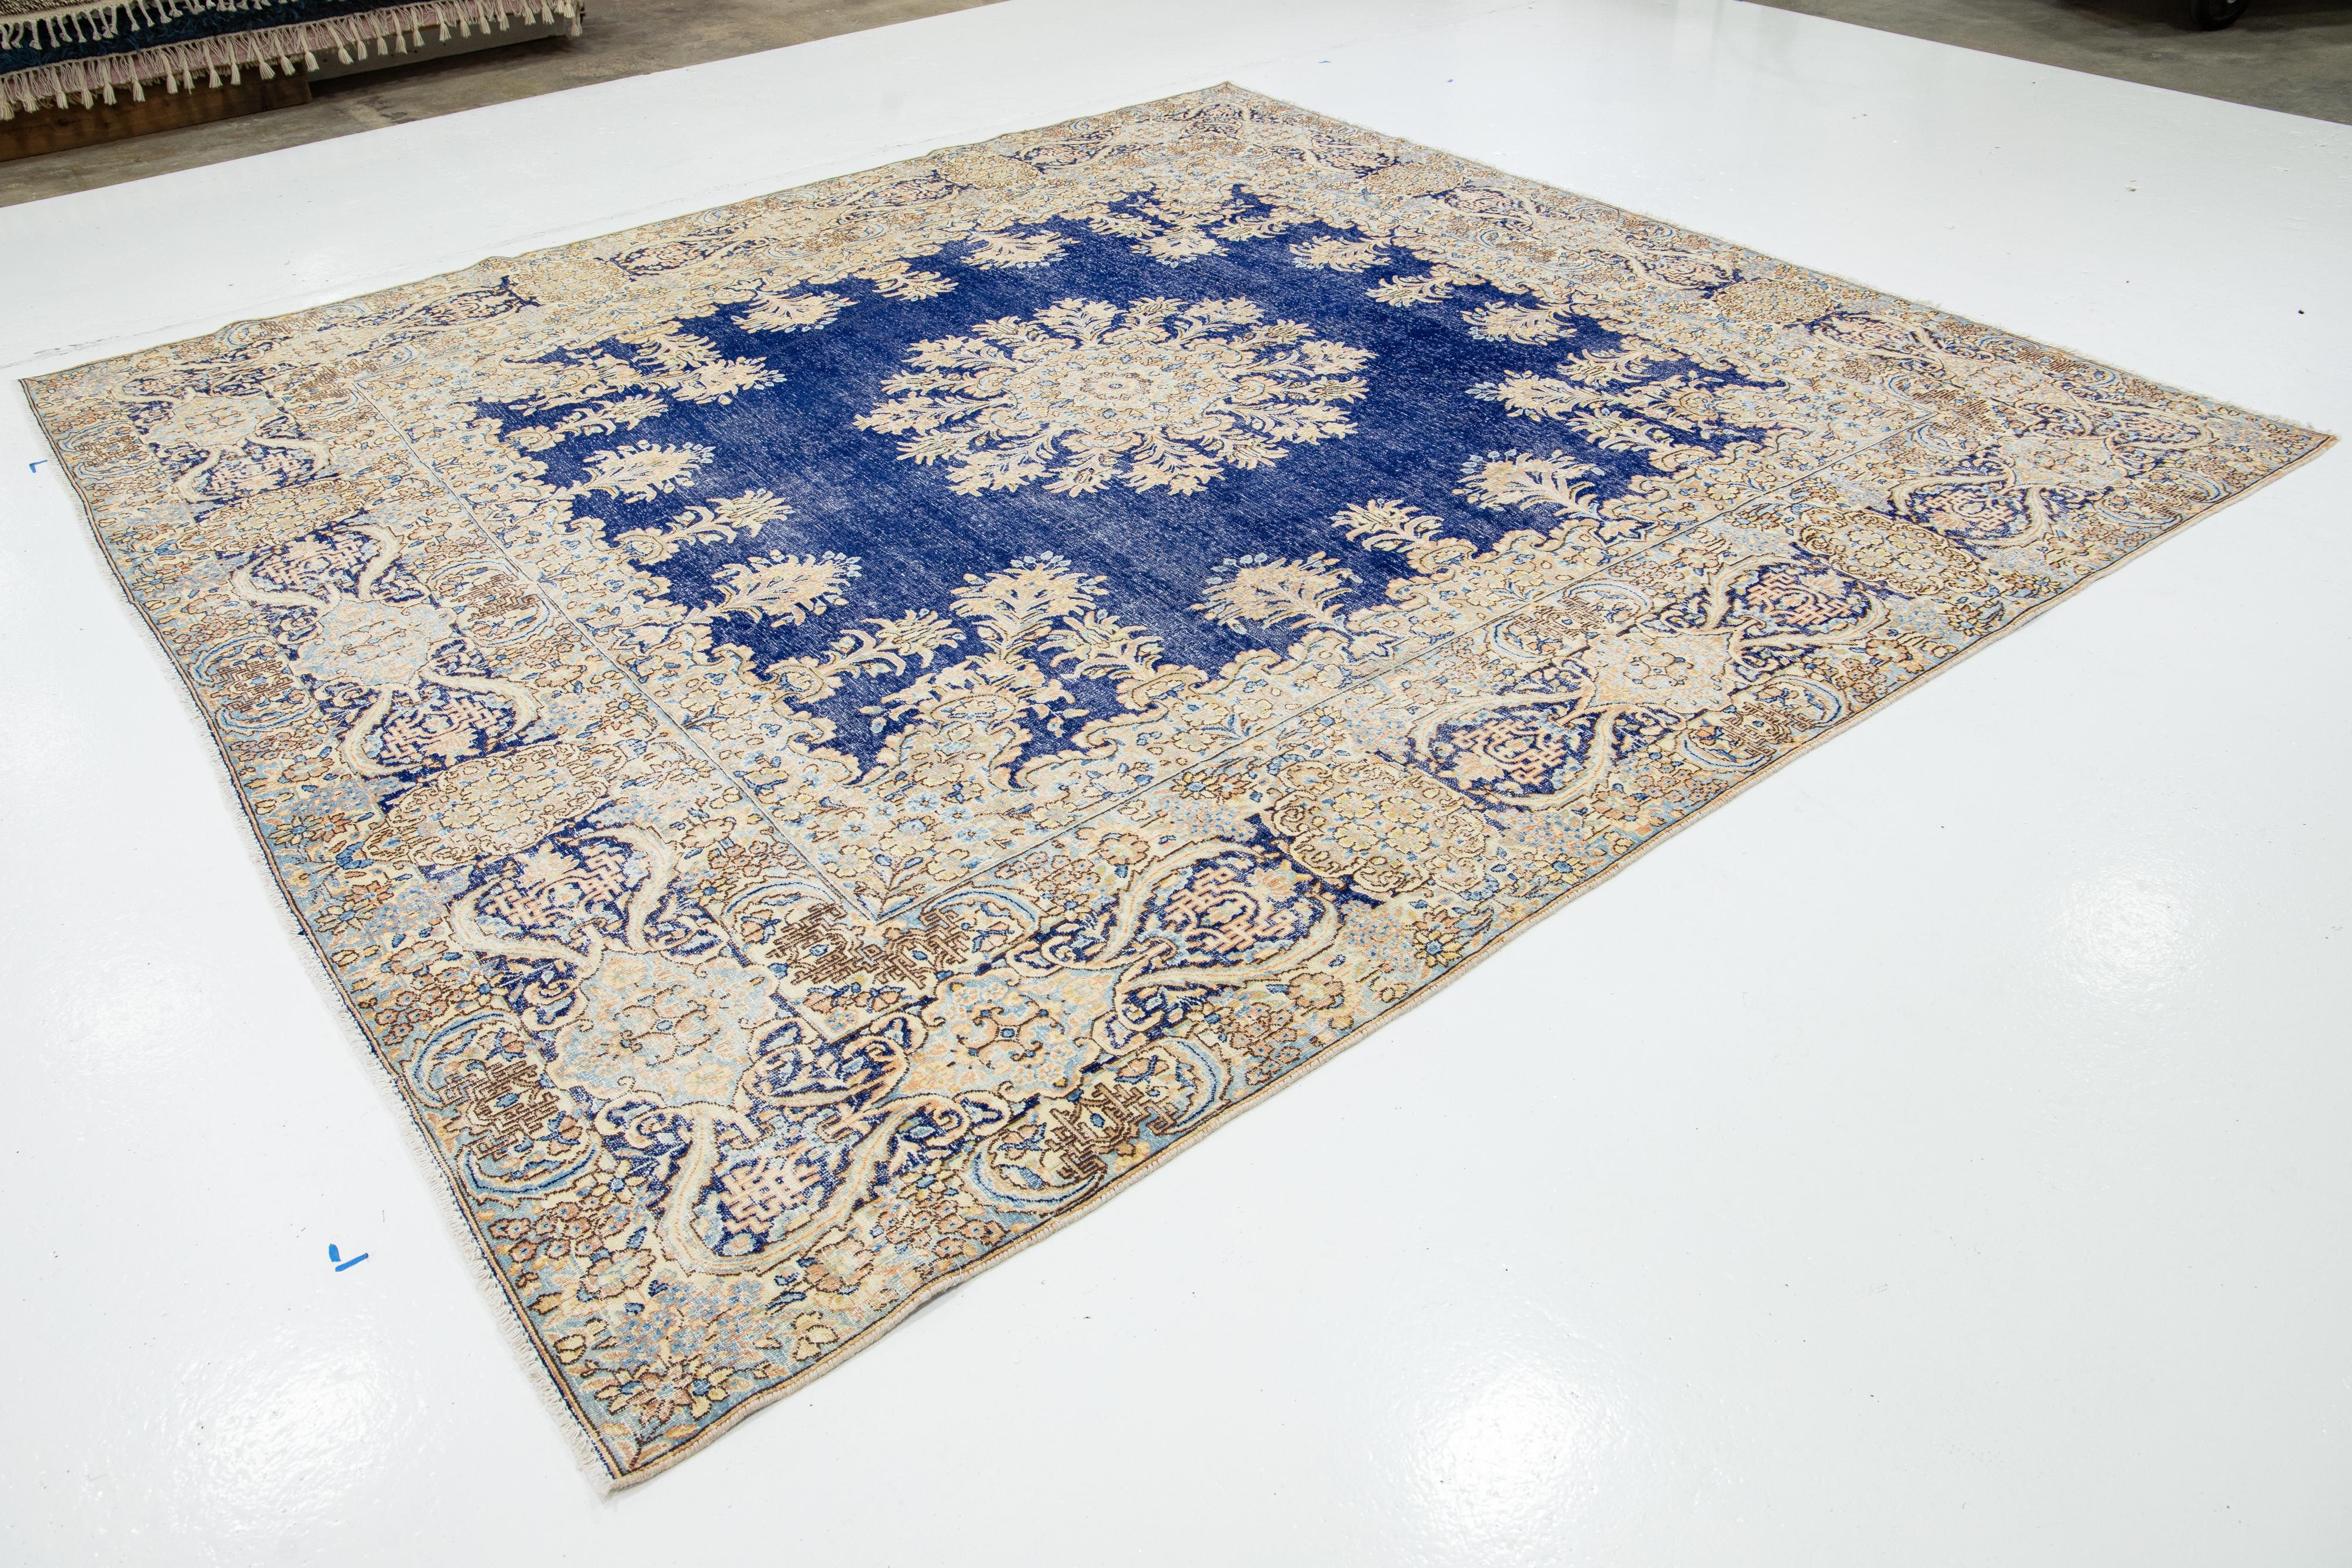 Blue Antique Persian Kerman Square  Wool Rug Handmade Featuring a Rosette Motif  In Good Condition For Sale In Norwalk, CT